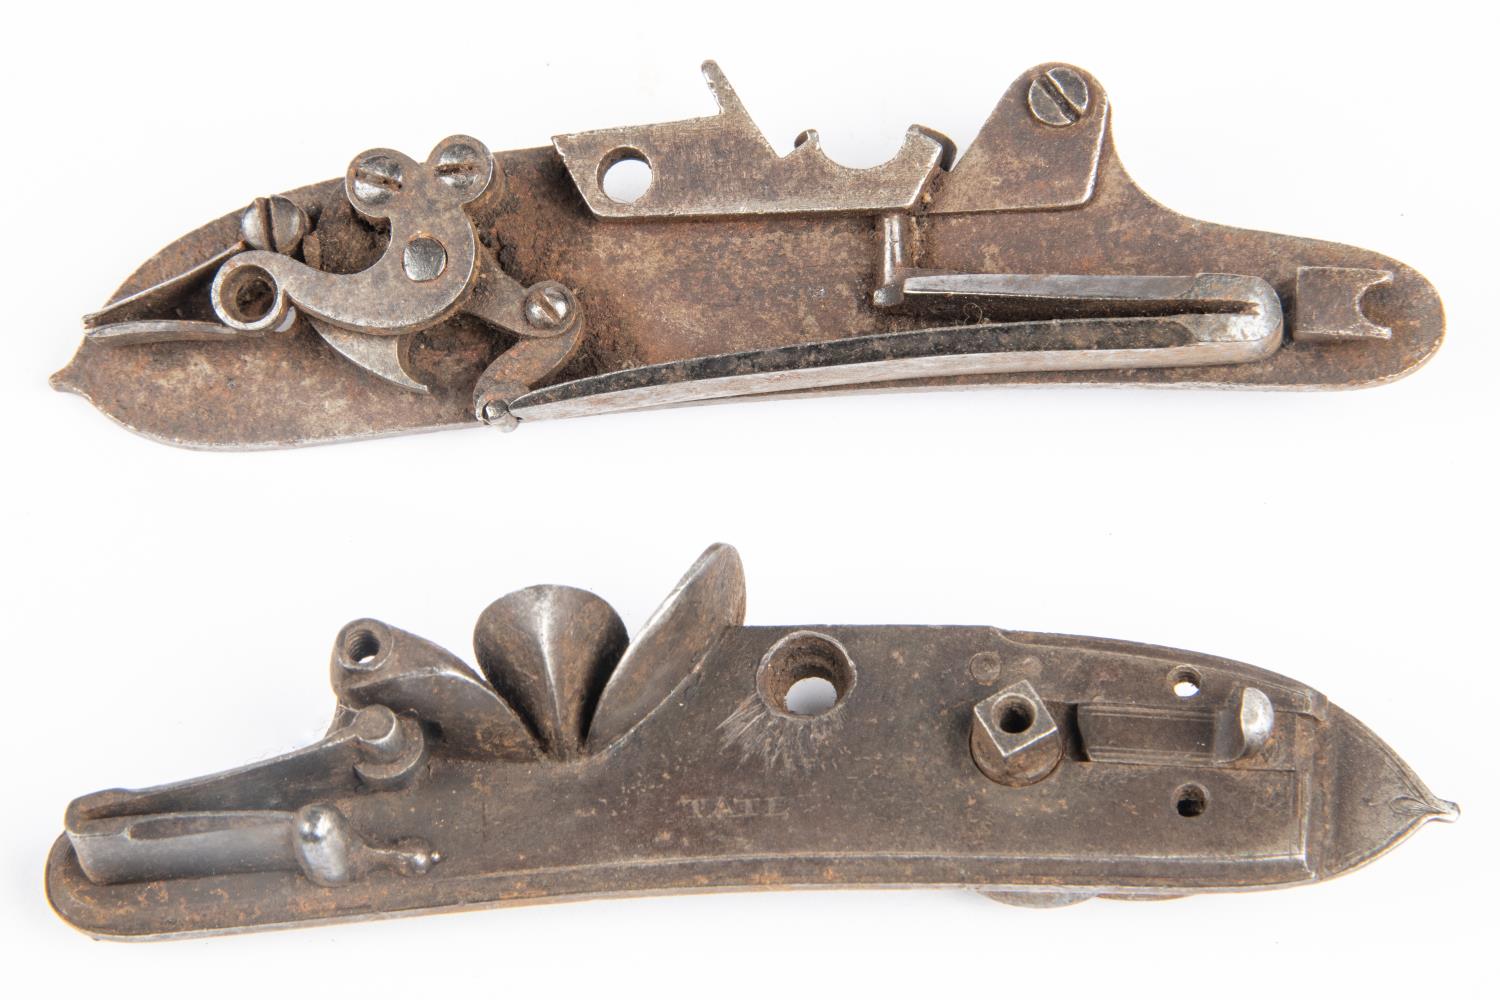 Two incomplete detached left hand locks from flintlock sporting guns, c 1820, one with safety bolt - Image 2 of 2